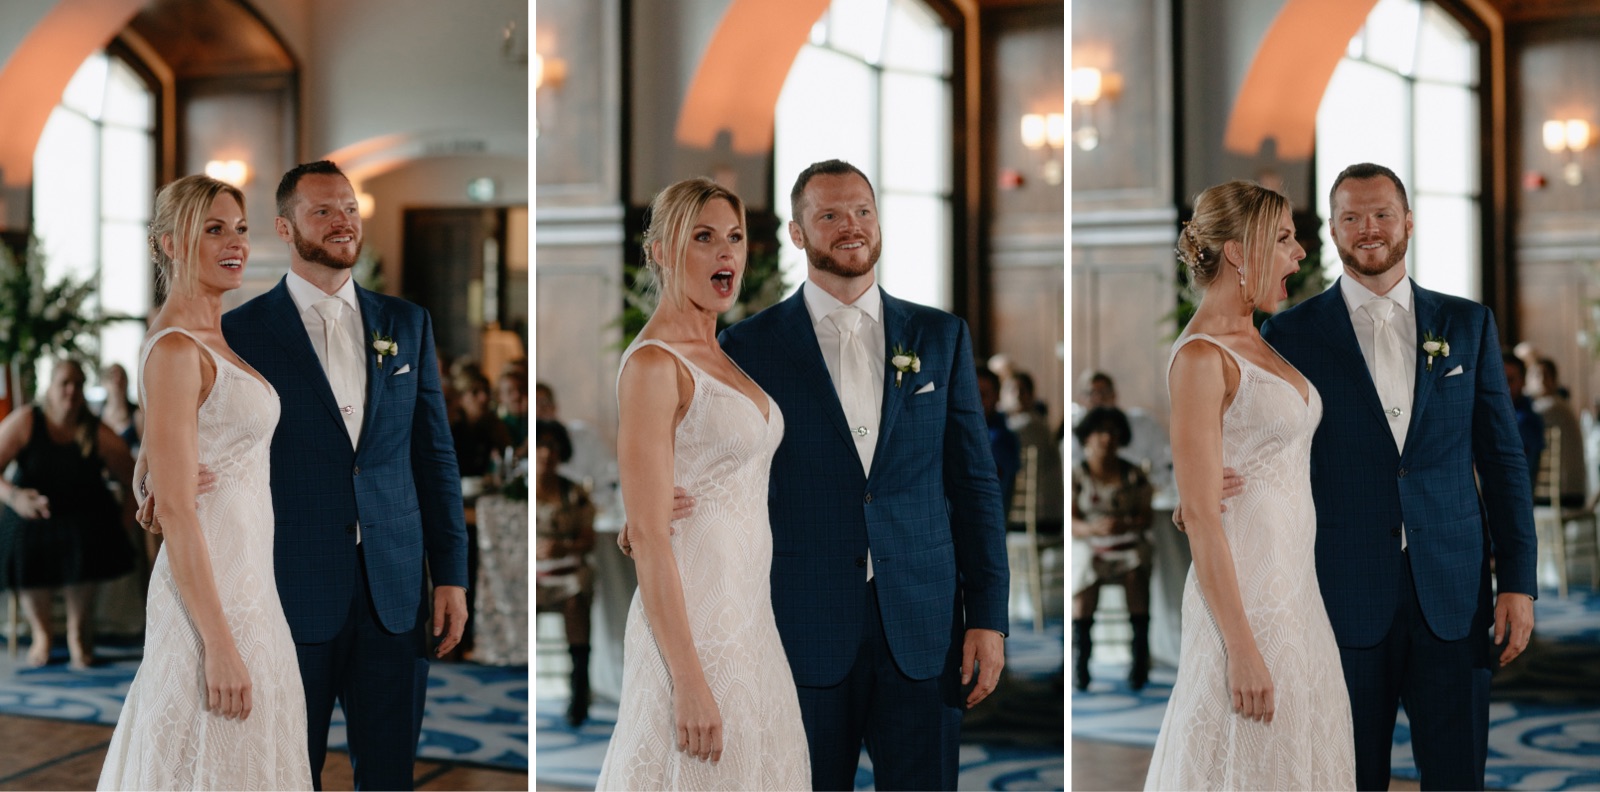 Surprise personalized first dance song by Carrie Underwood's string artist